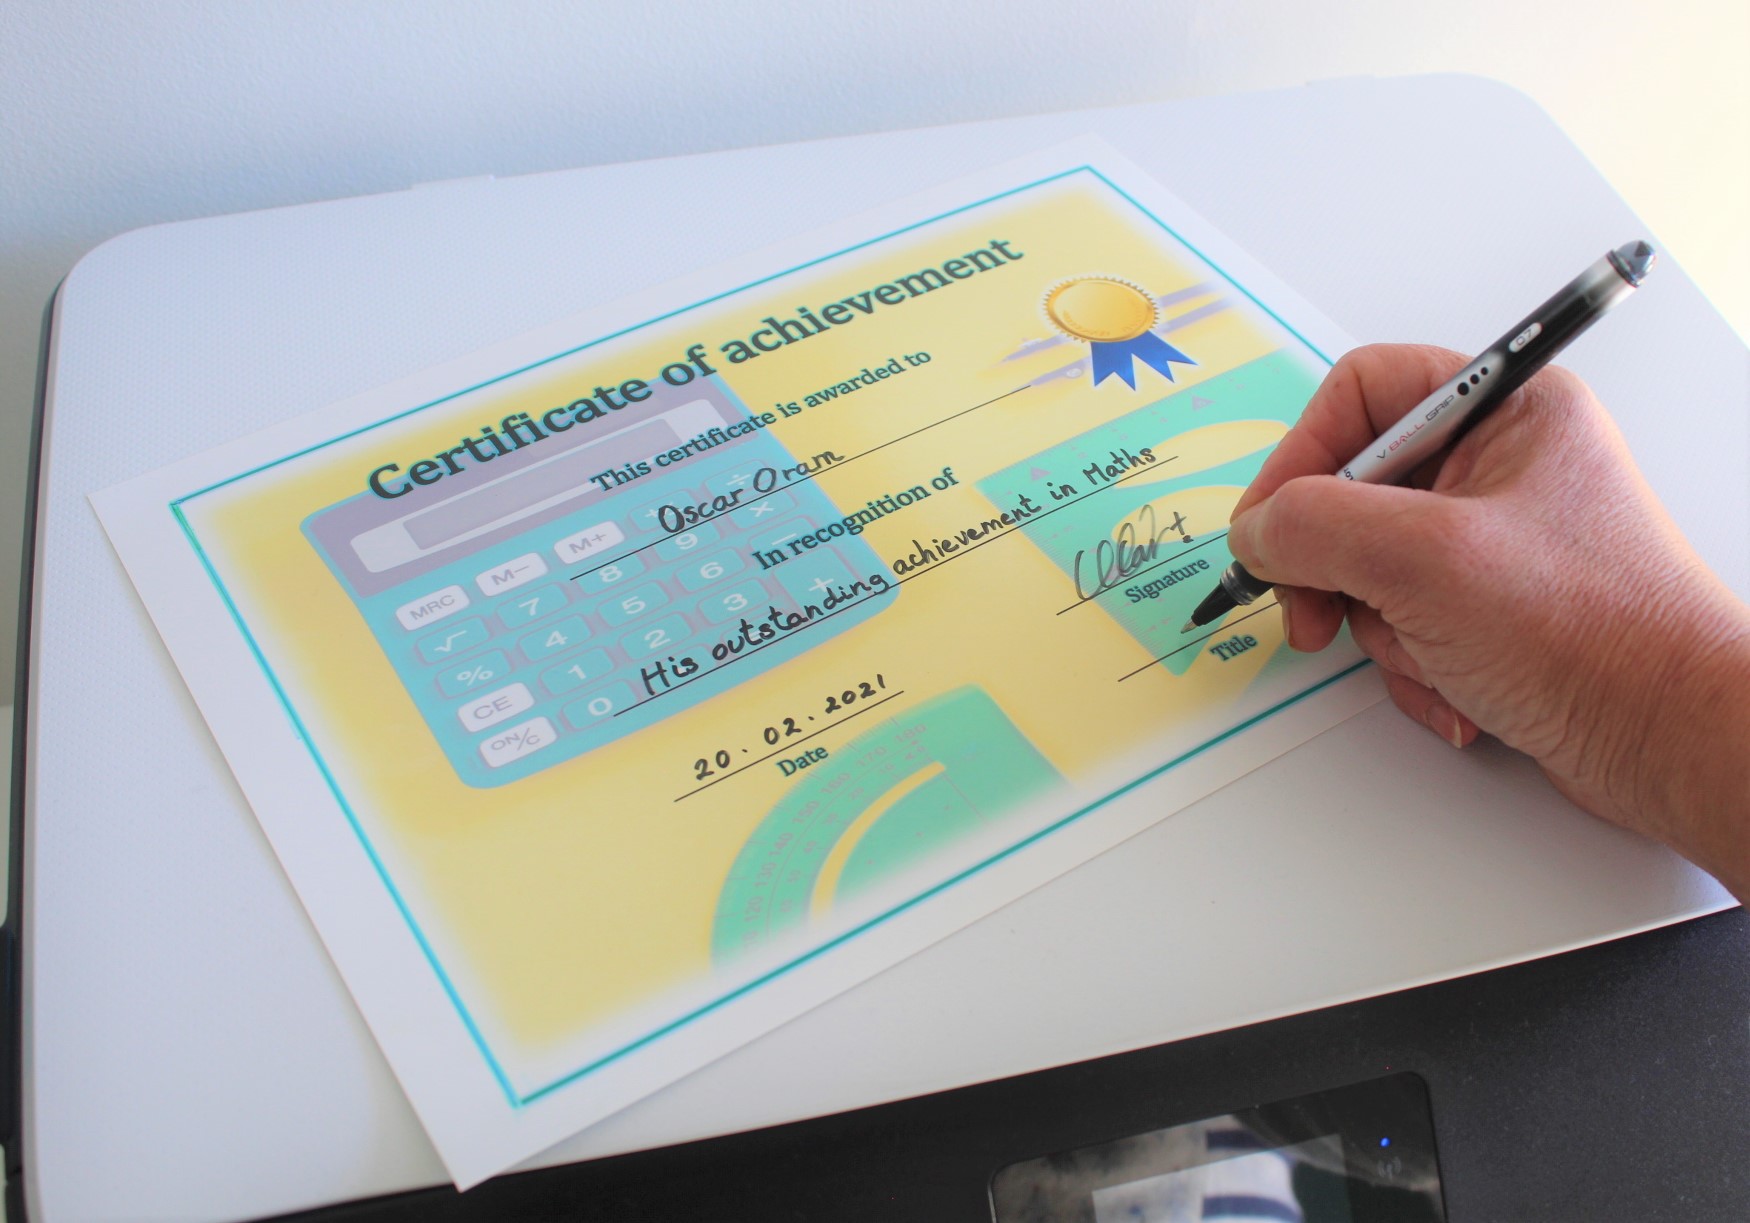 Completing the certificate by hand